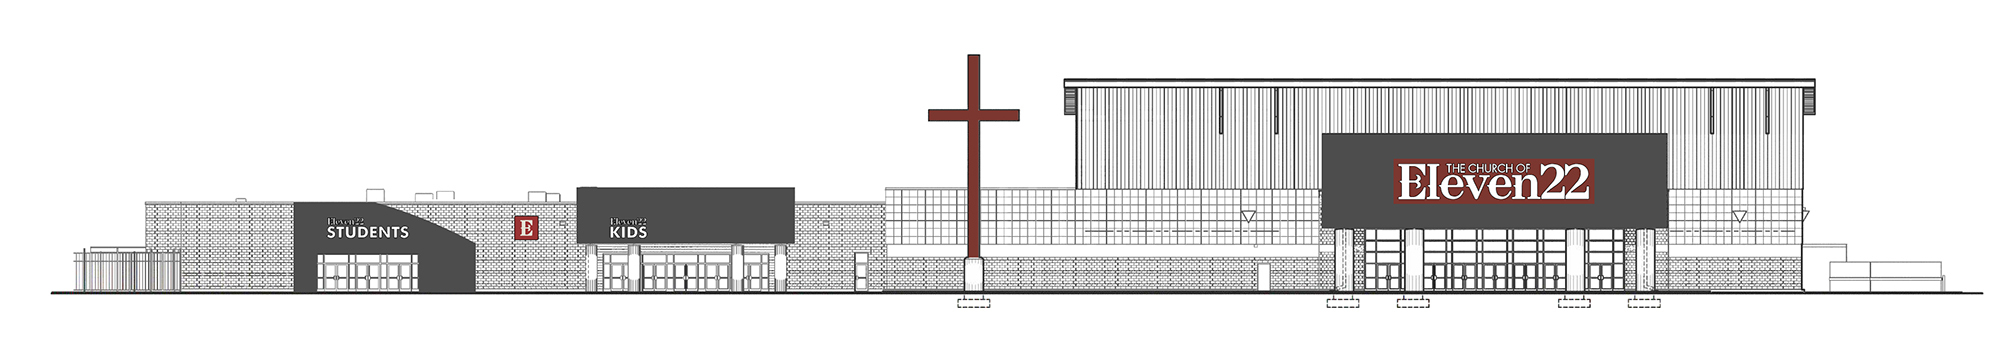 A rendering of The Church of Eleven22 campus at 14286 Beach Blvd.